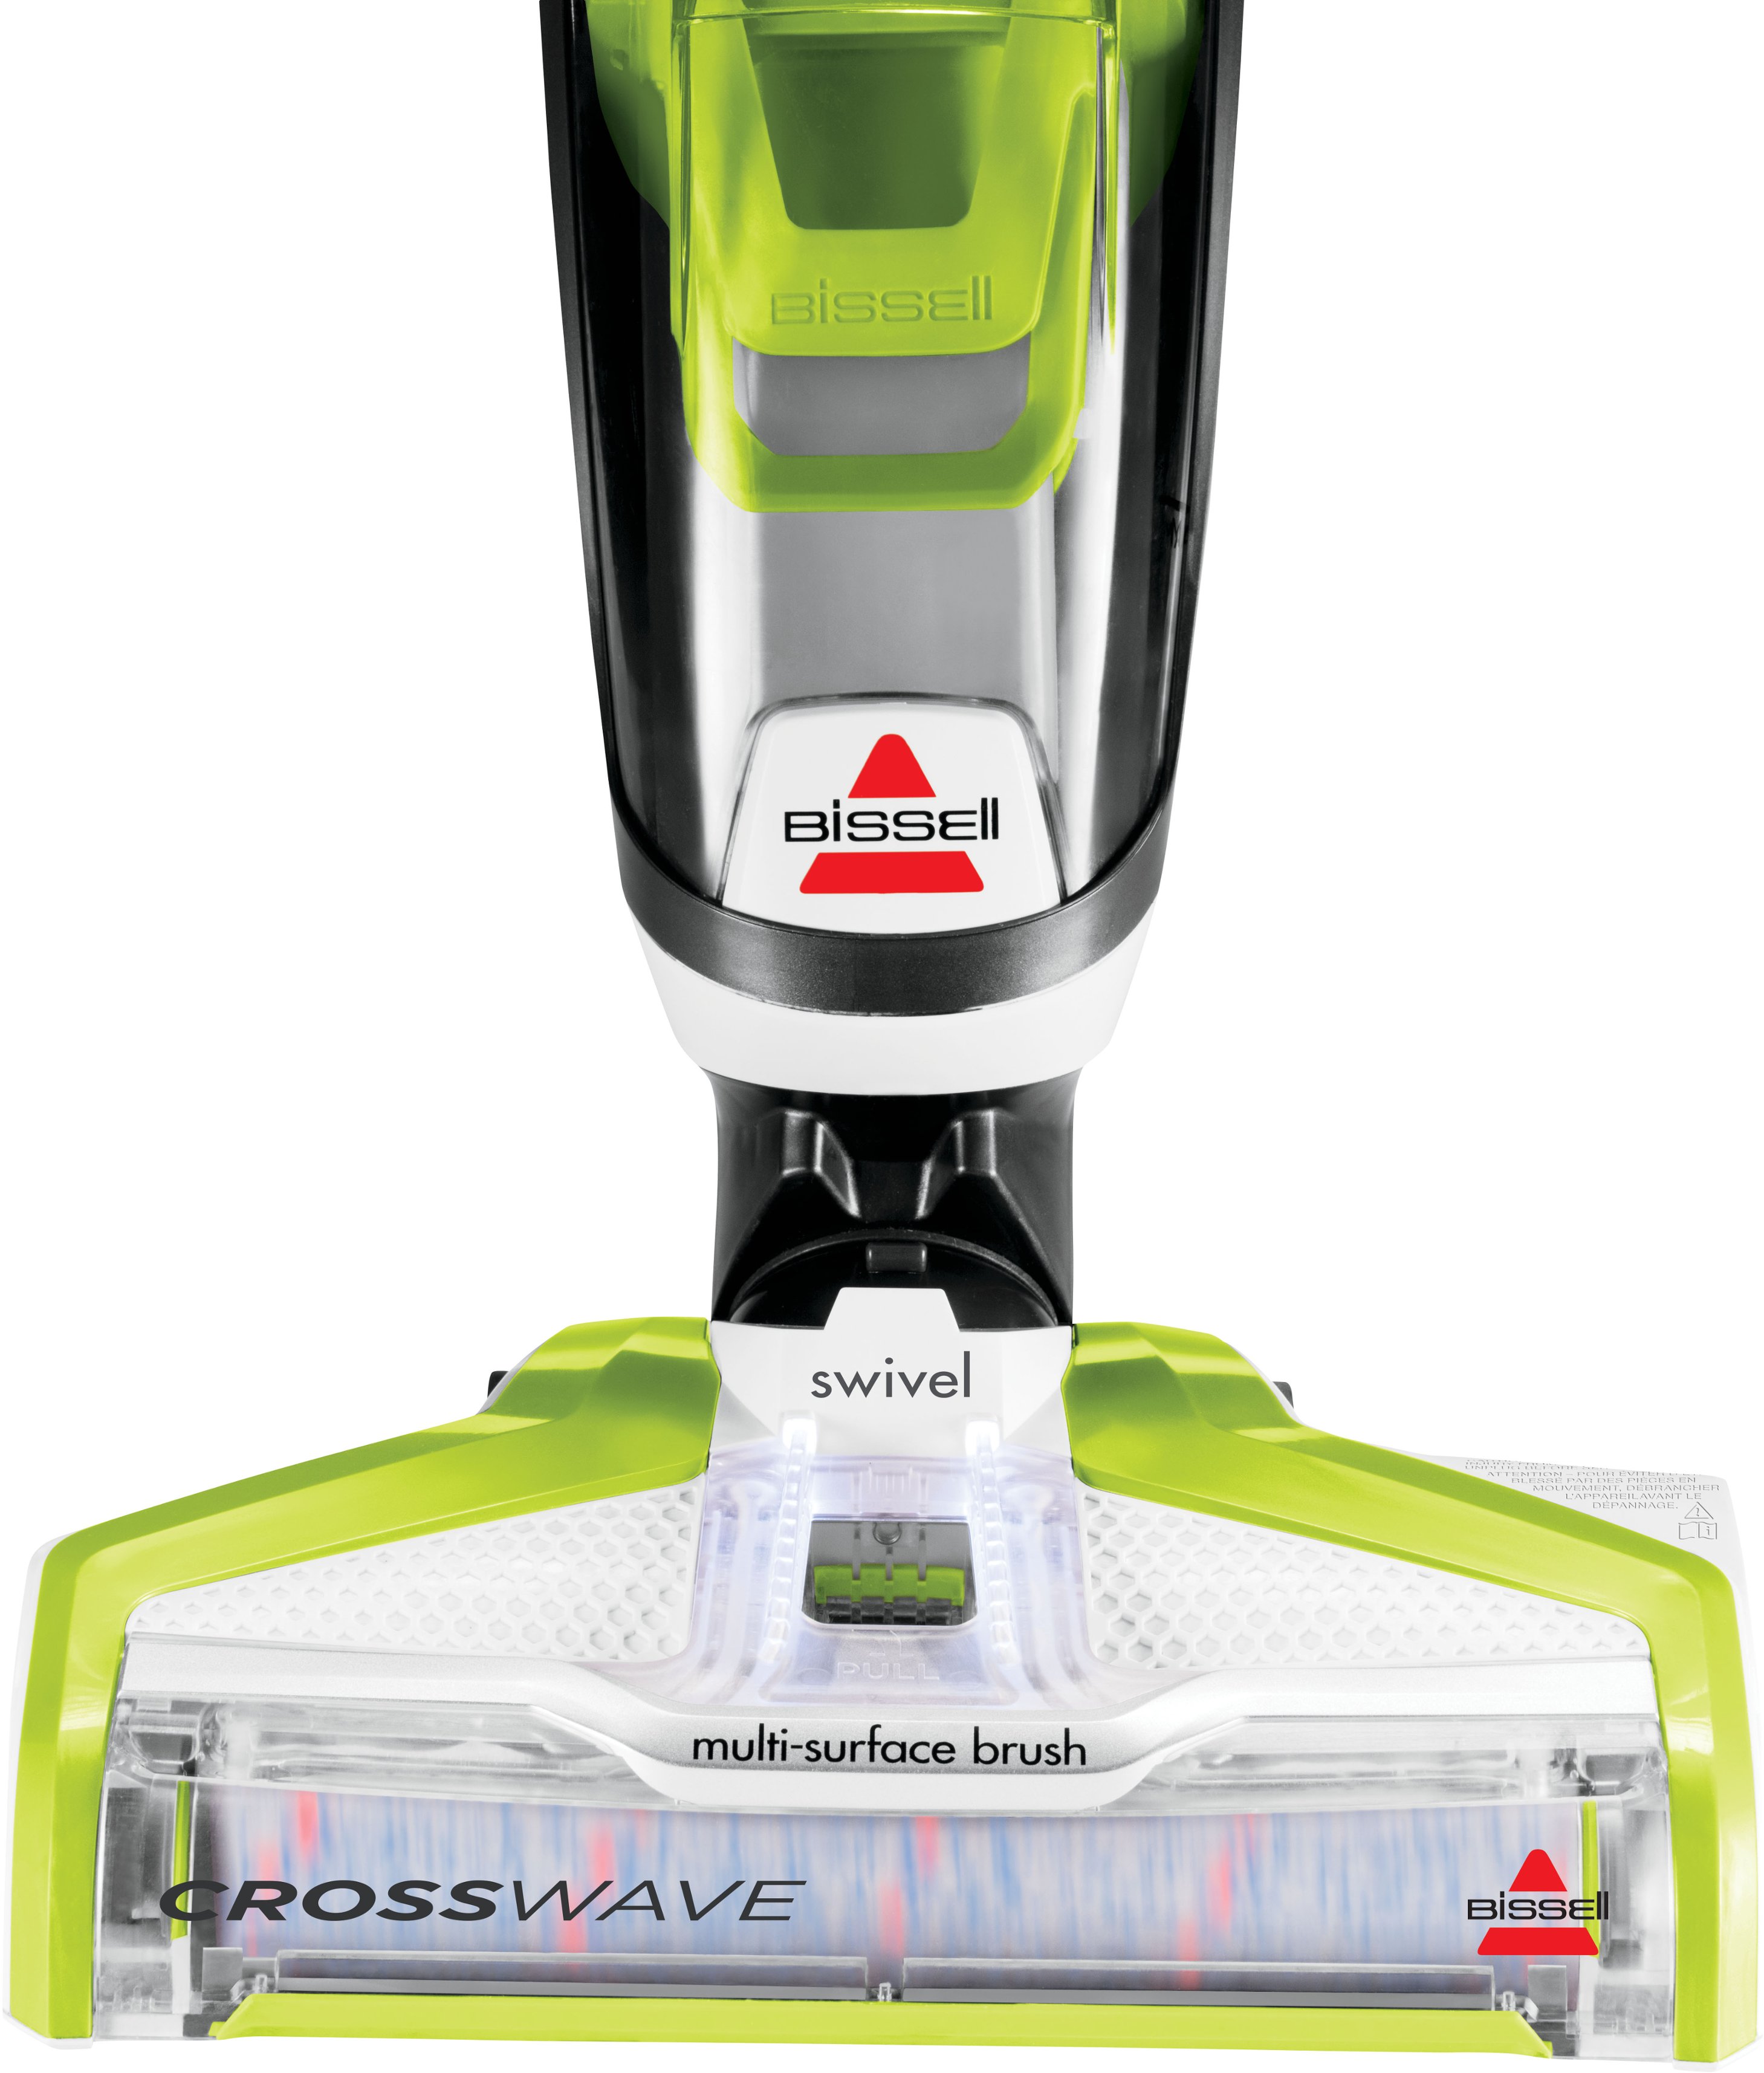 Left View: BISSELL CrossWave All-in-One Multi-Surface Wet Dry Upright Vacuum - Molded White, Titanium and Cha Cha Lime Green